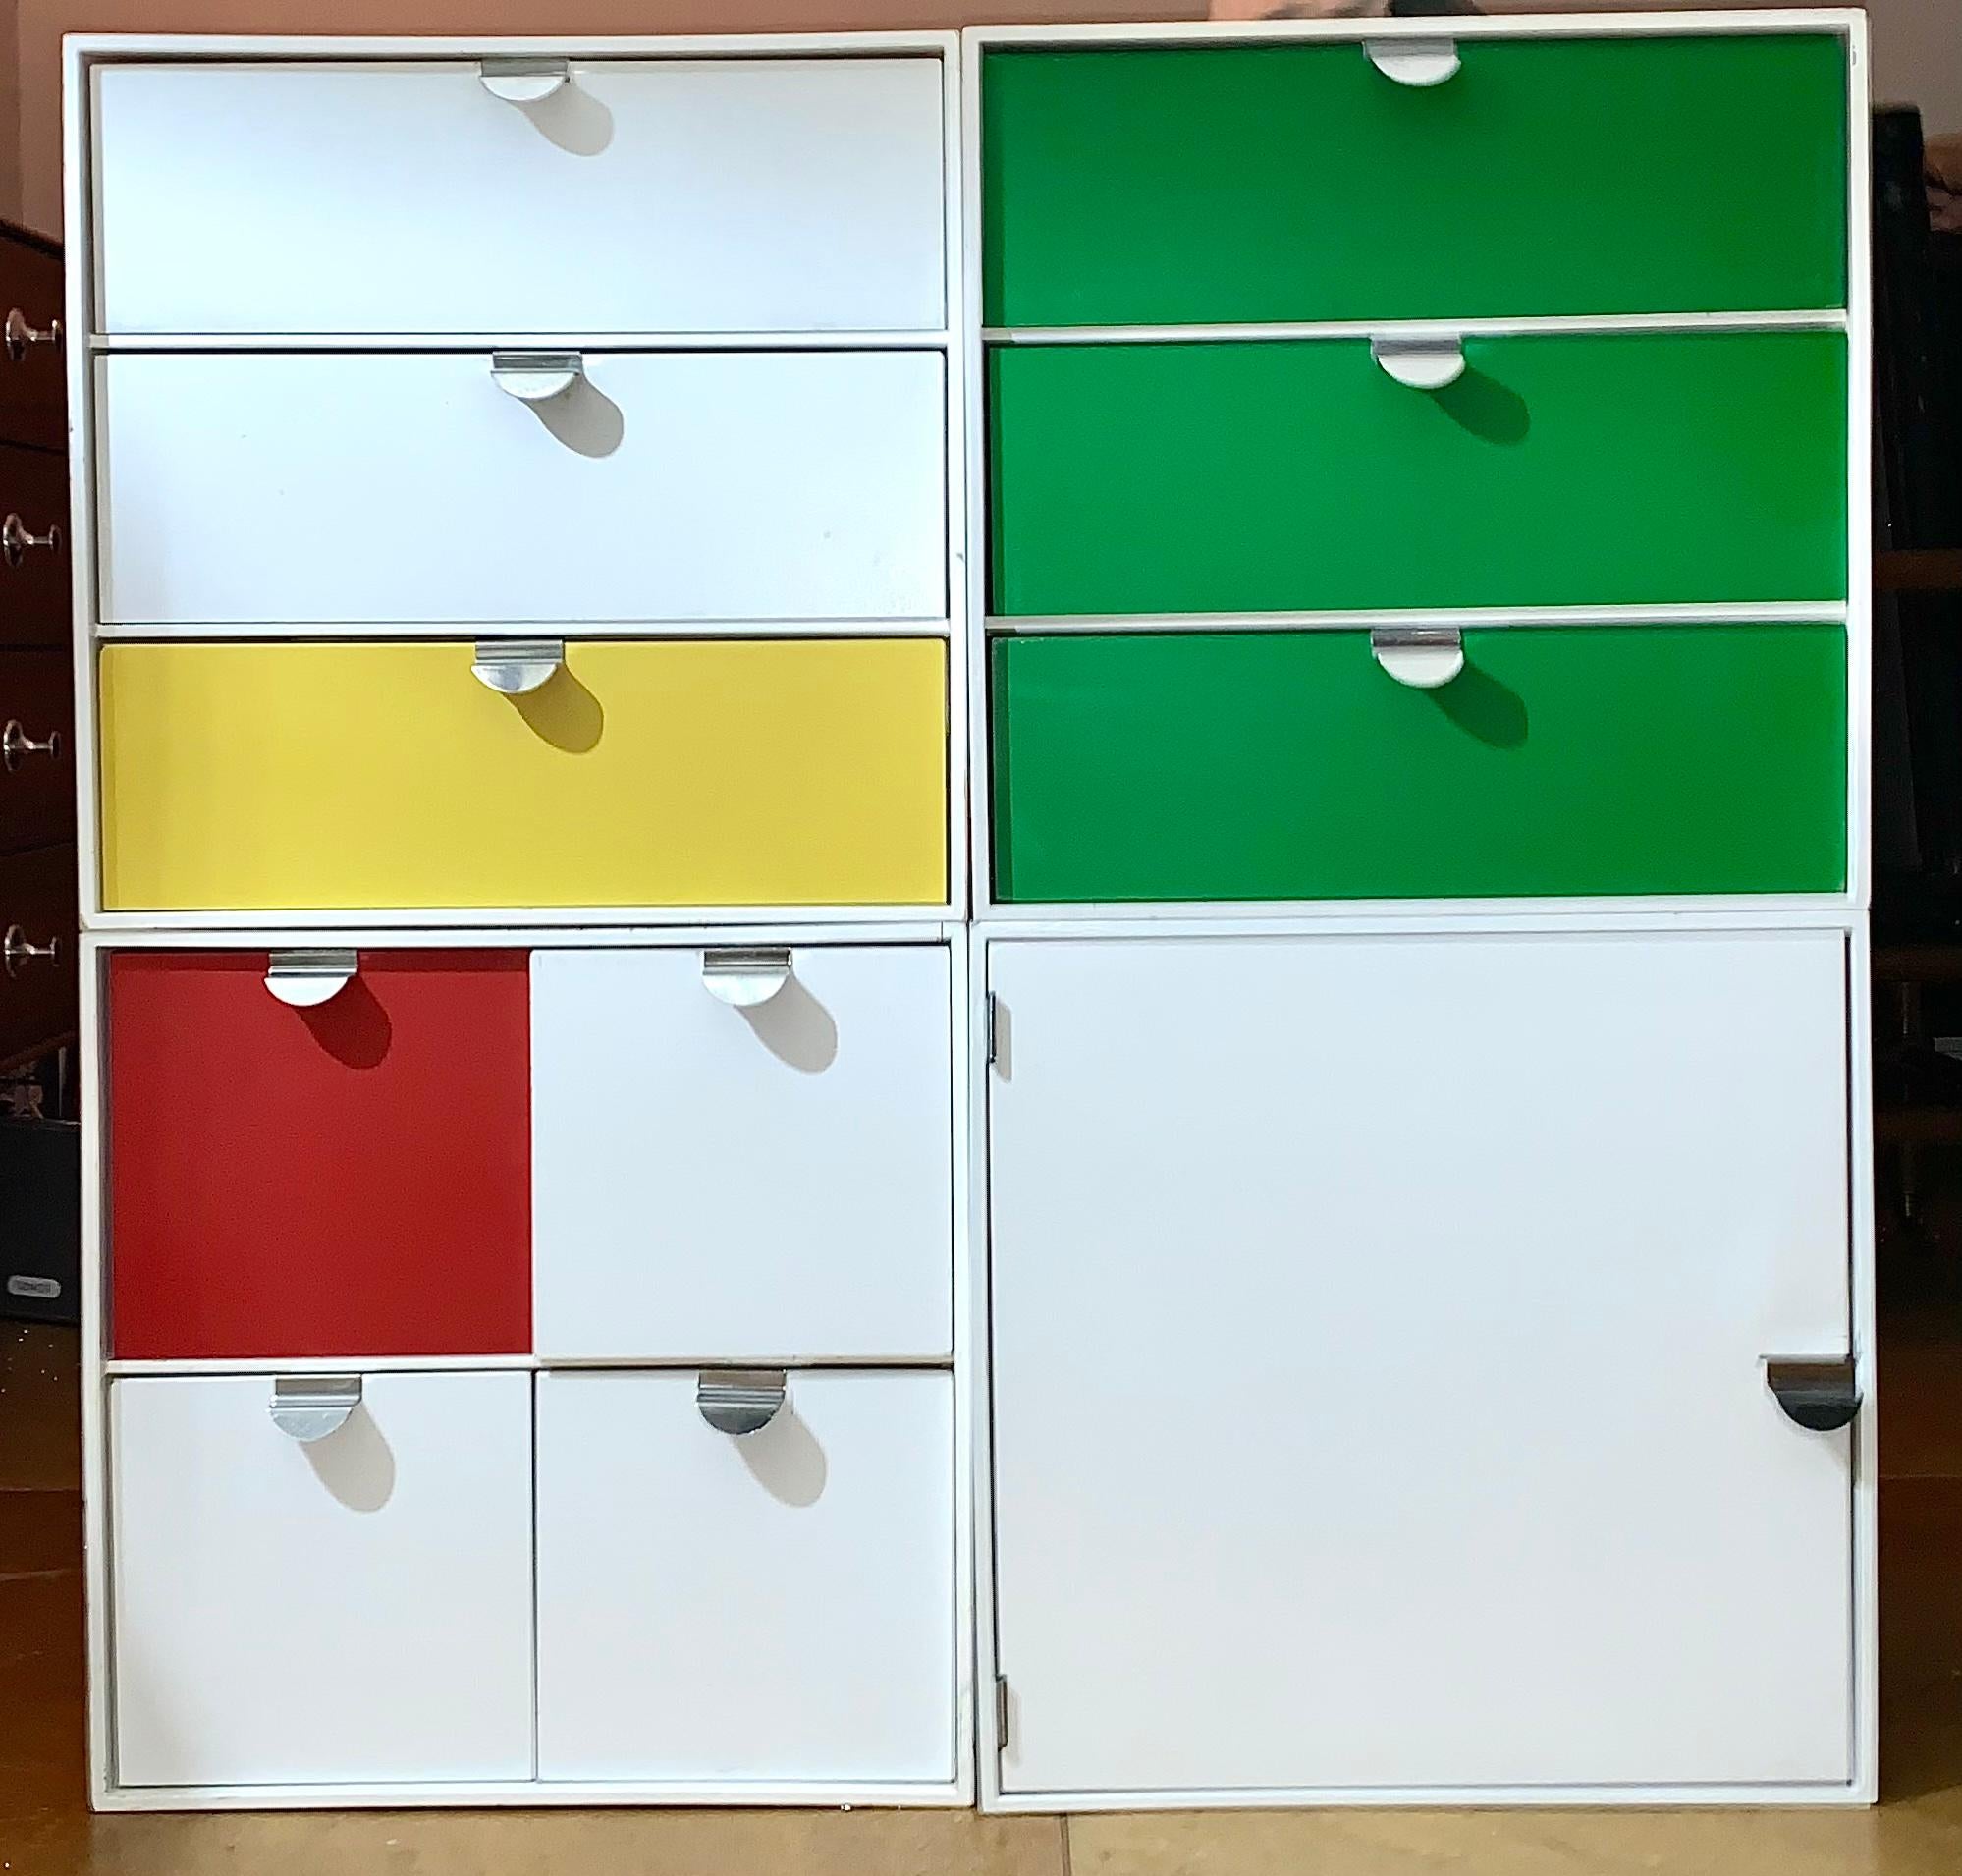 Vintage Palaset Palanox modular storage box set of 4, Red, Green, White, Yellow, Finland, 1972

Palaset Palanox, multicolored stackable boxes that allow you to build your own shelf, only produced for a few years in the early 1970s. During his